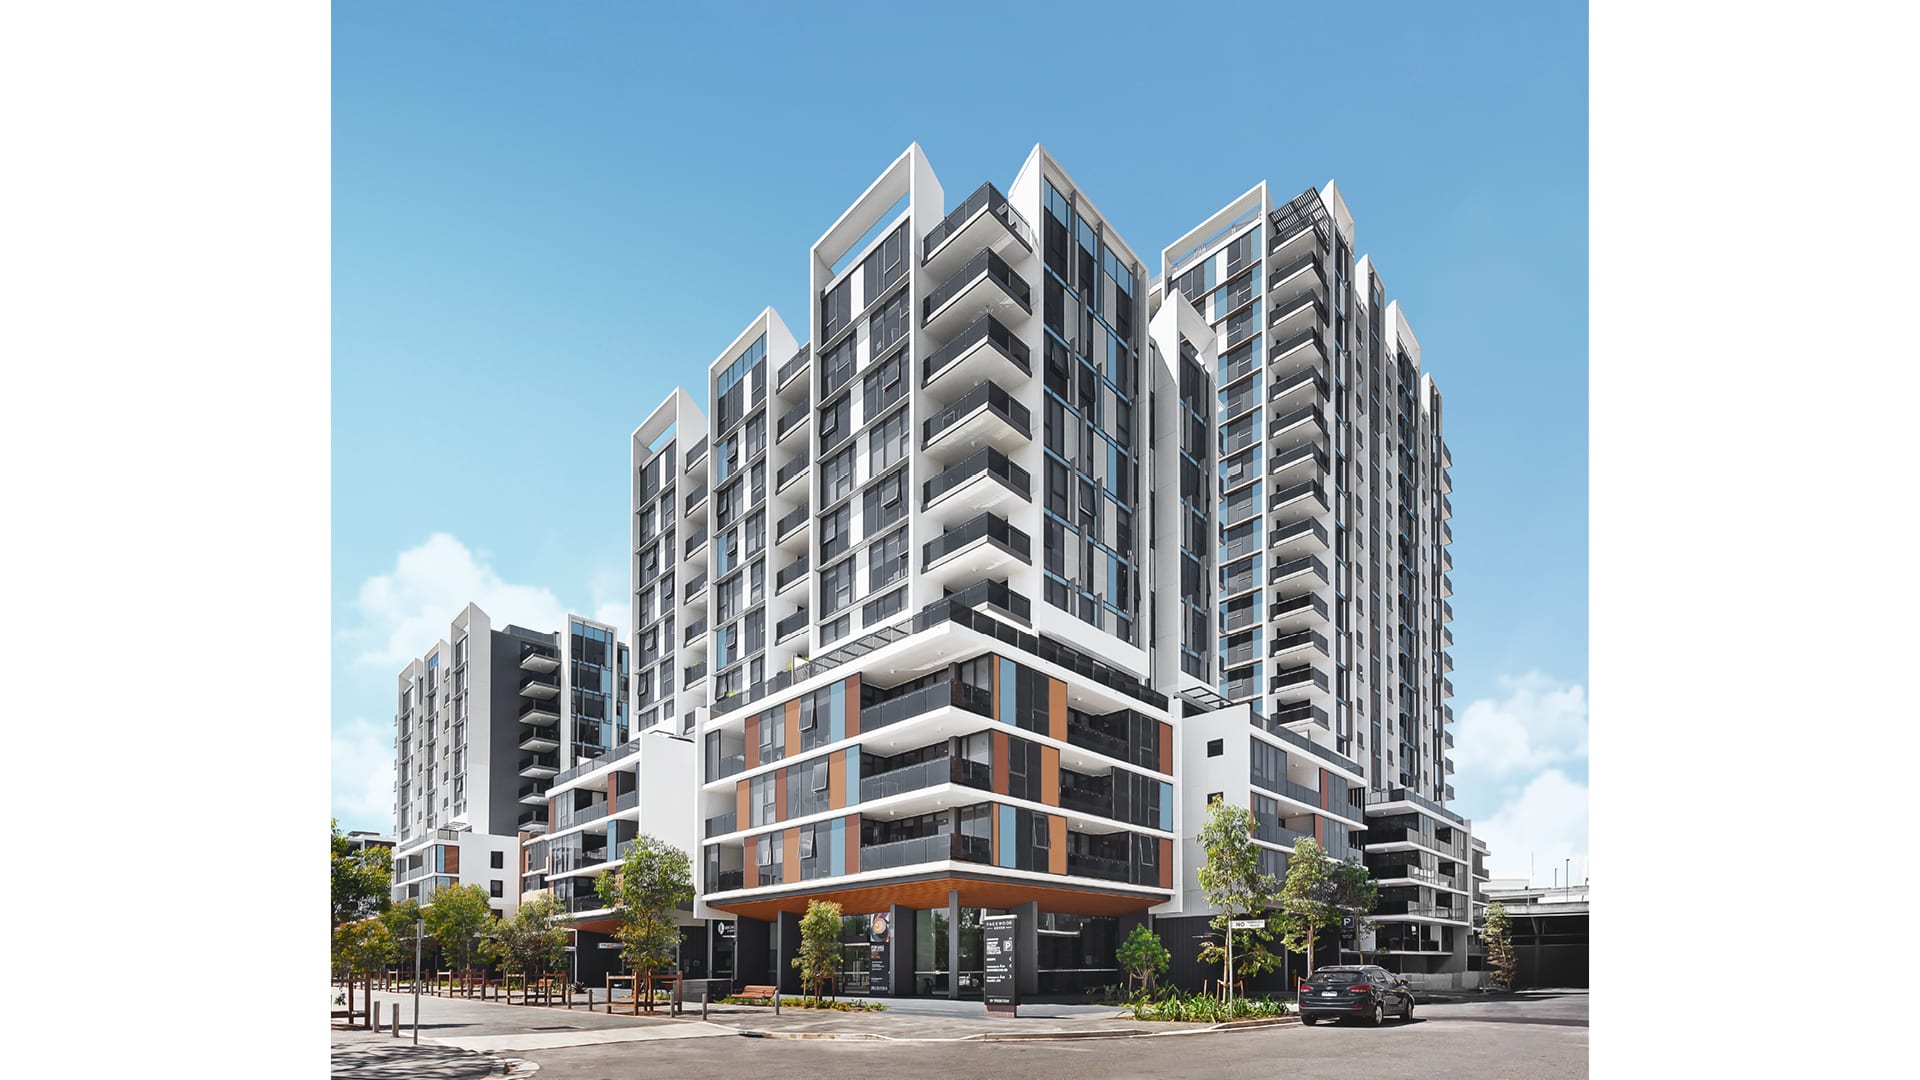 Five apartments under $900k close to UNSW in Sydney's Kensington